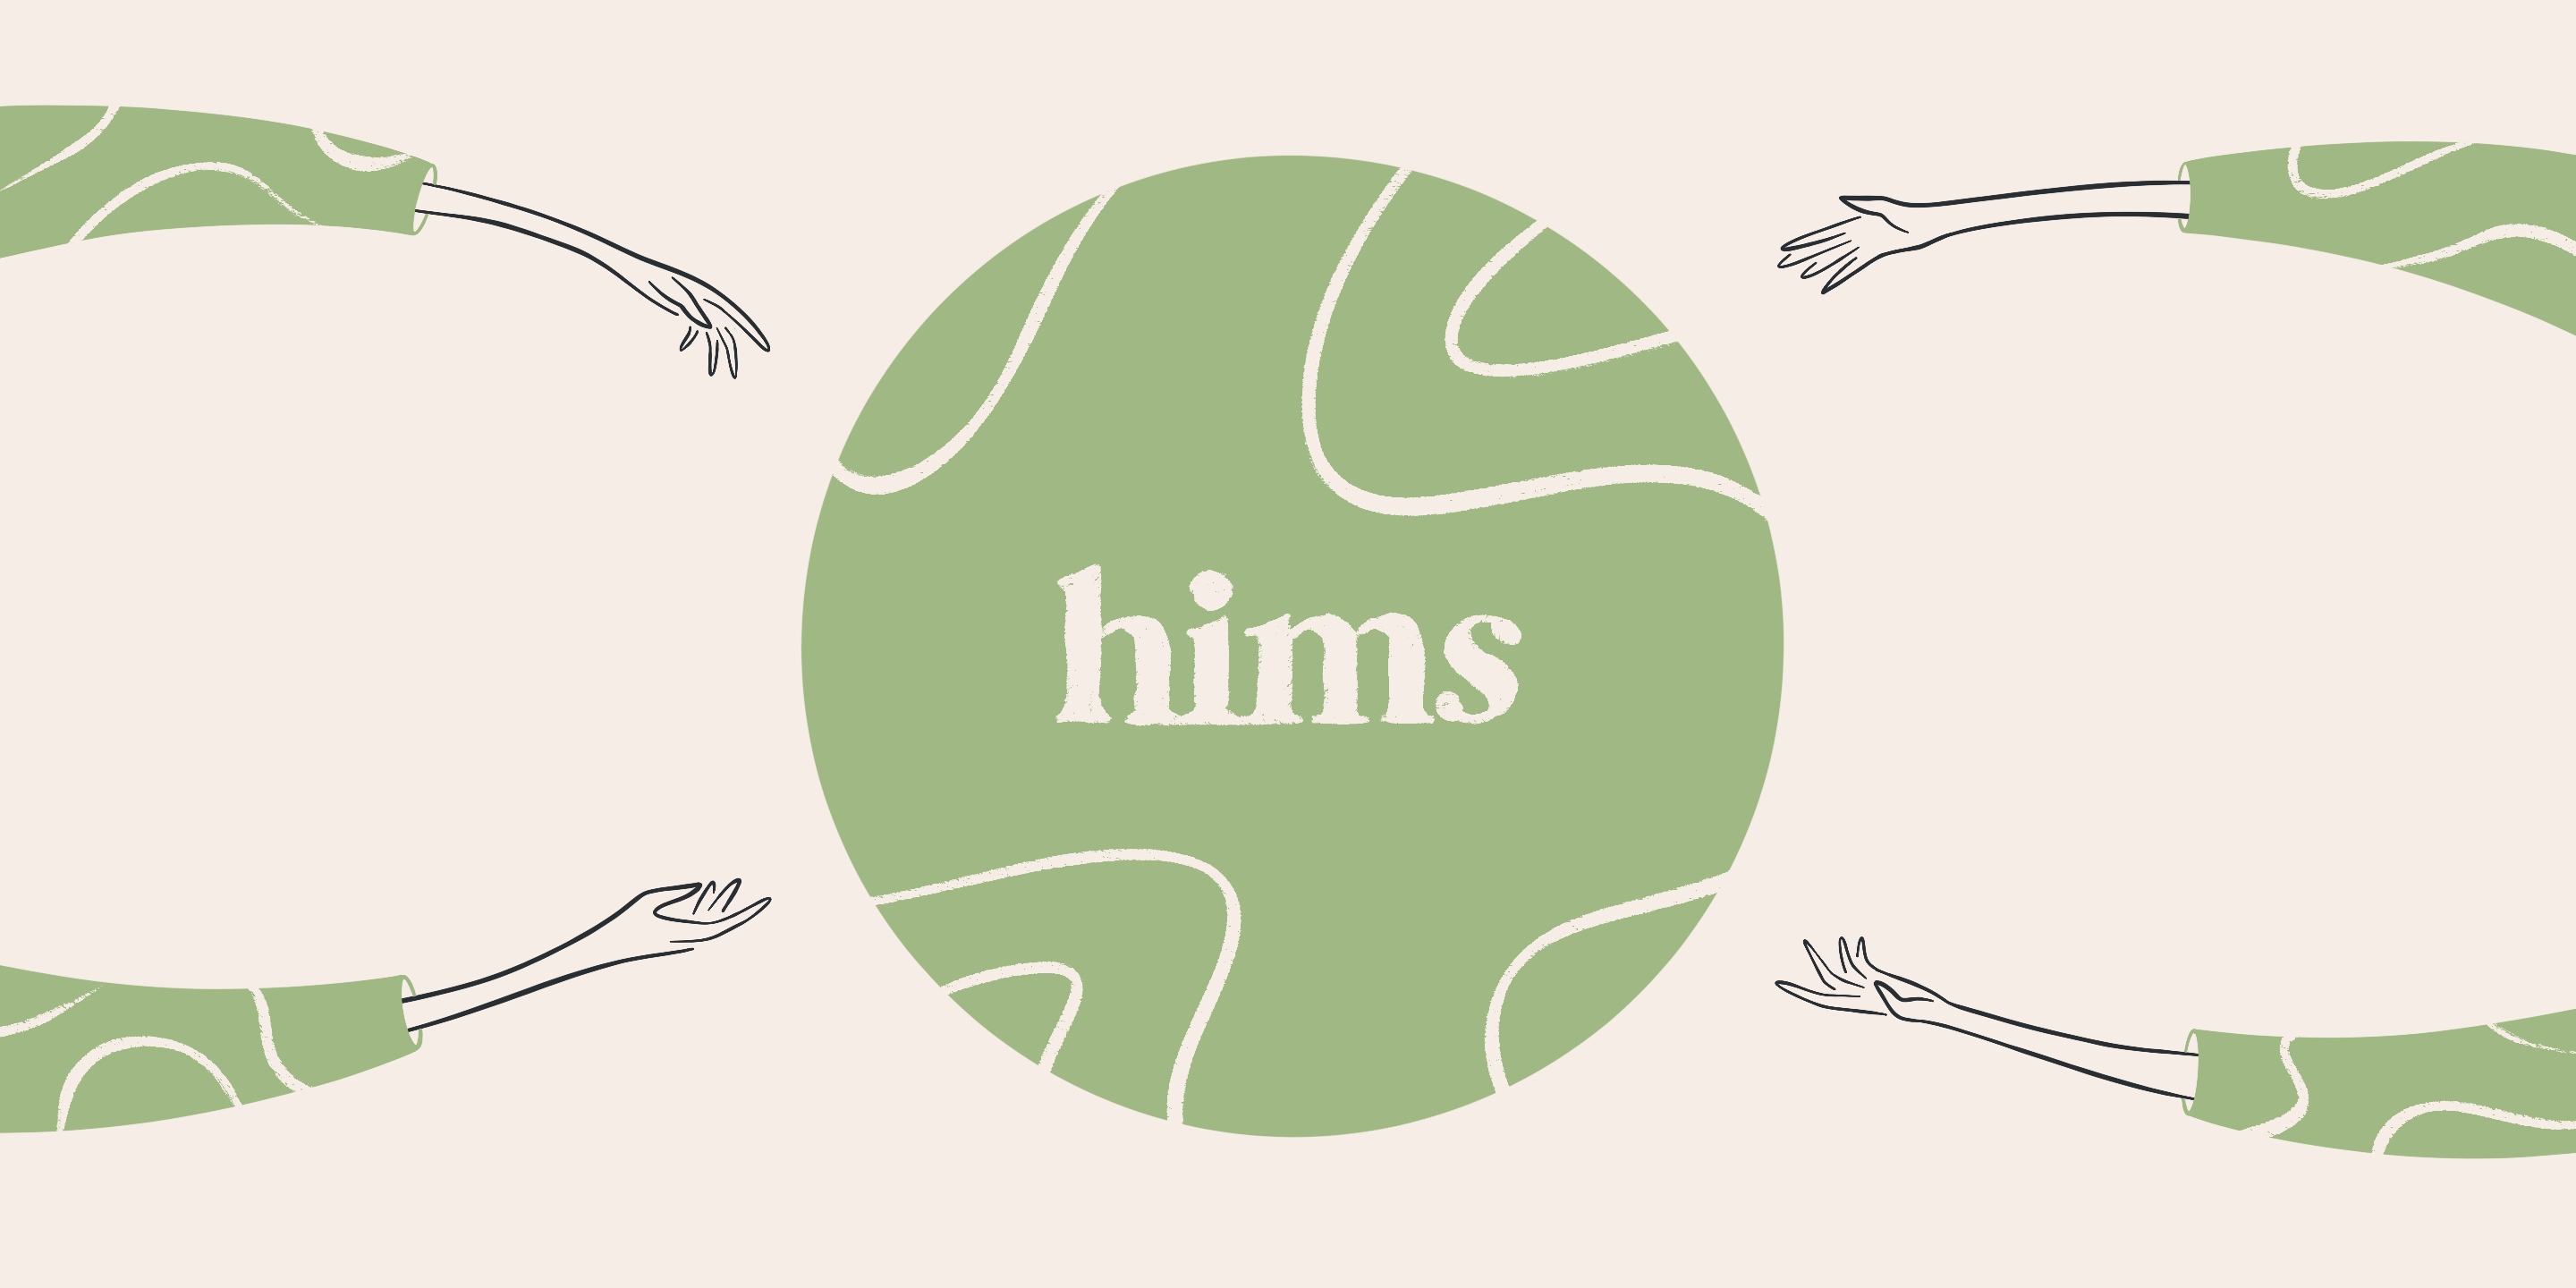 Hims & Hers Go Public with Oaktree Merger